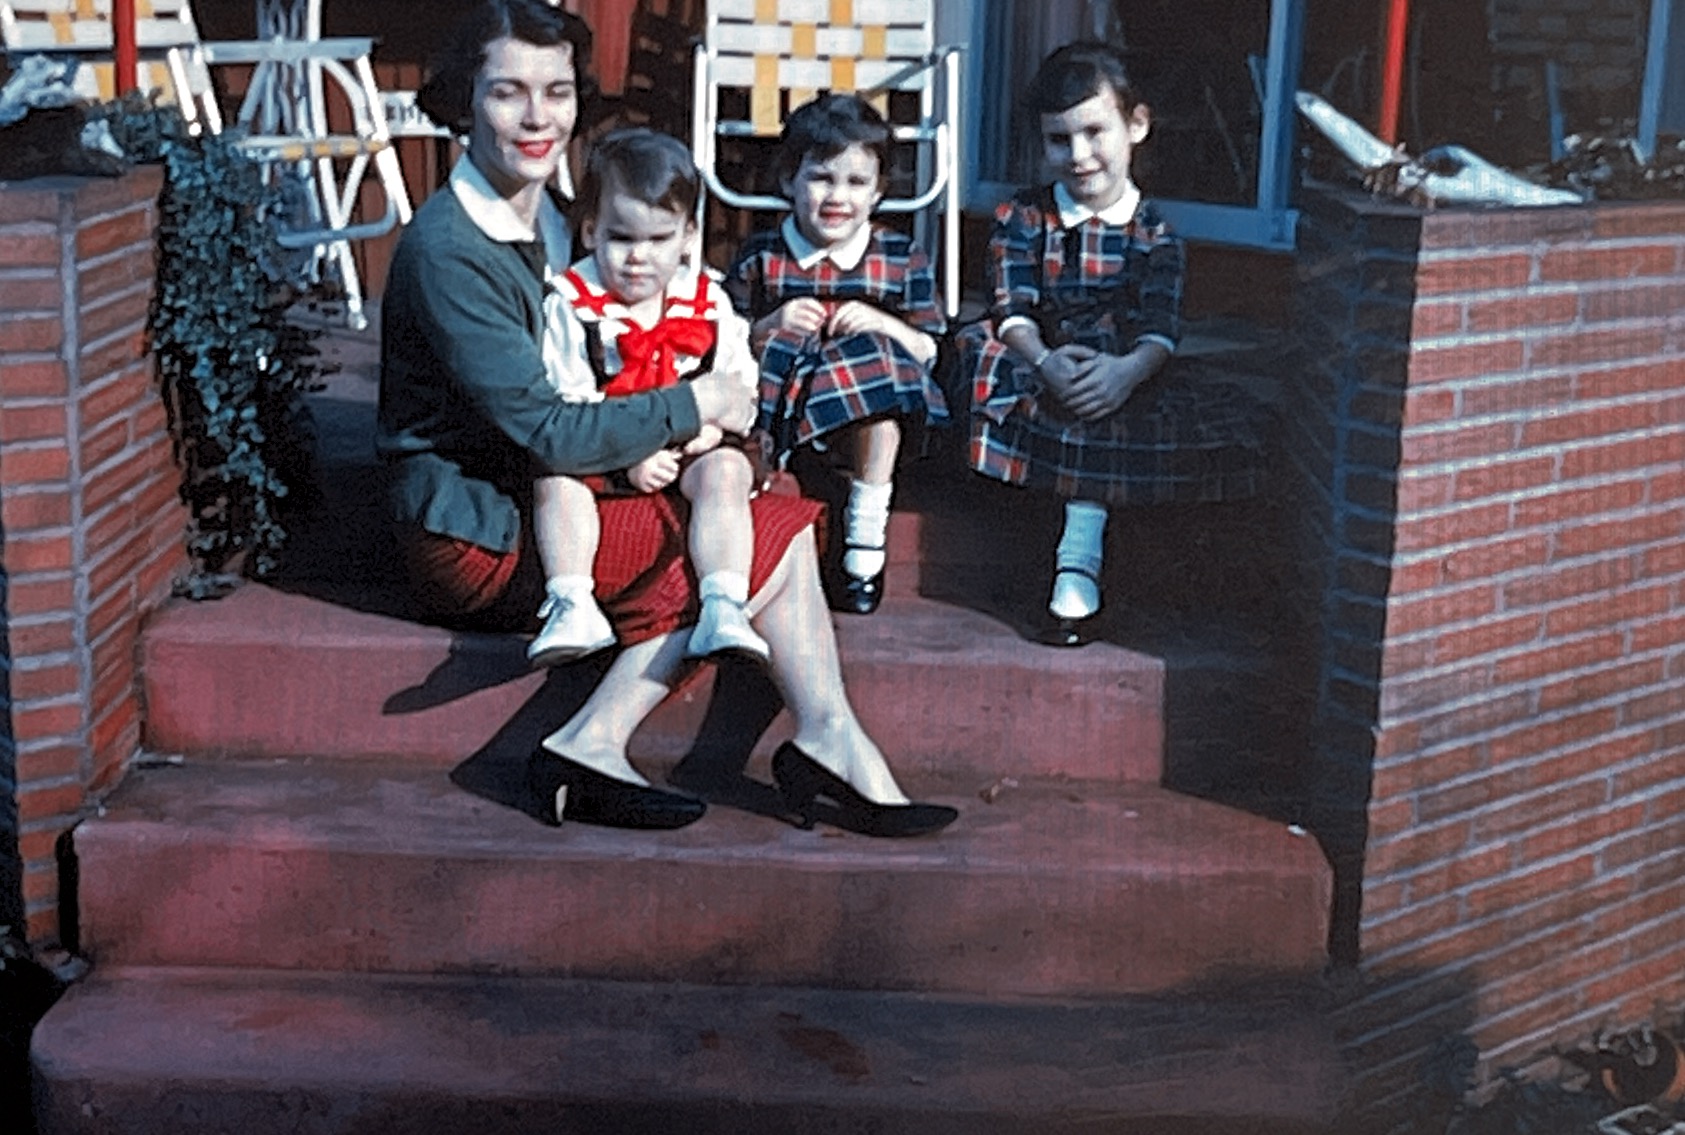 This picture was taken in Tacoma, Washington  on my Grandparents back porch steps in the Spring of 1959.  This picture is of myself  (Debbie Jardeen) sitting on my Mom’s (Dolores Jardeen) lap with my two sisters (Lynne Jardeen and Cheryl Jardeen).